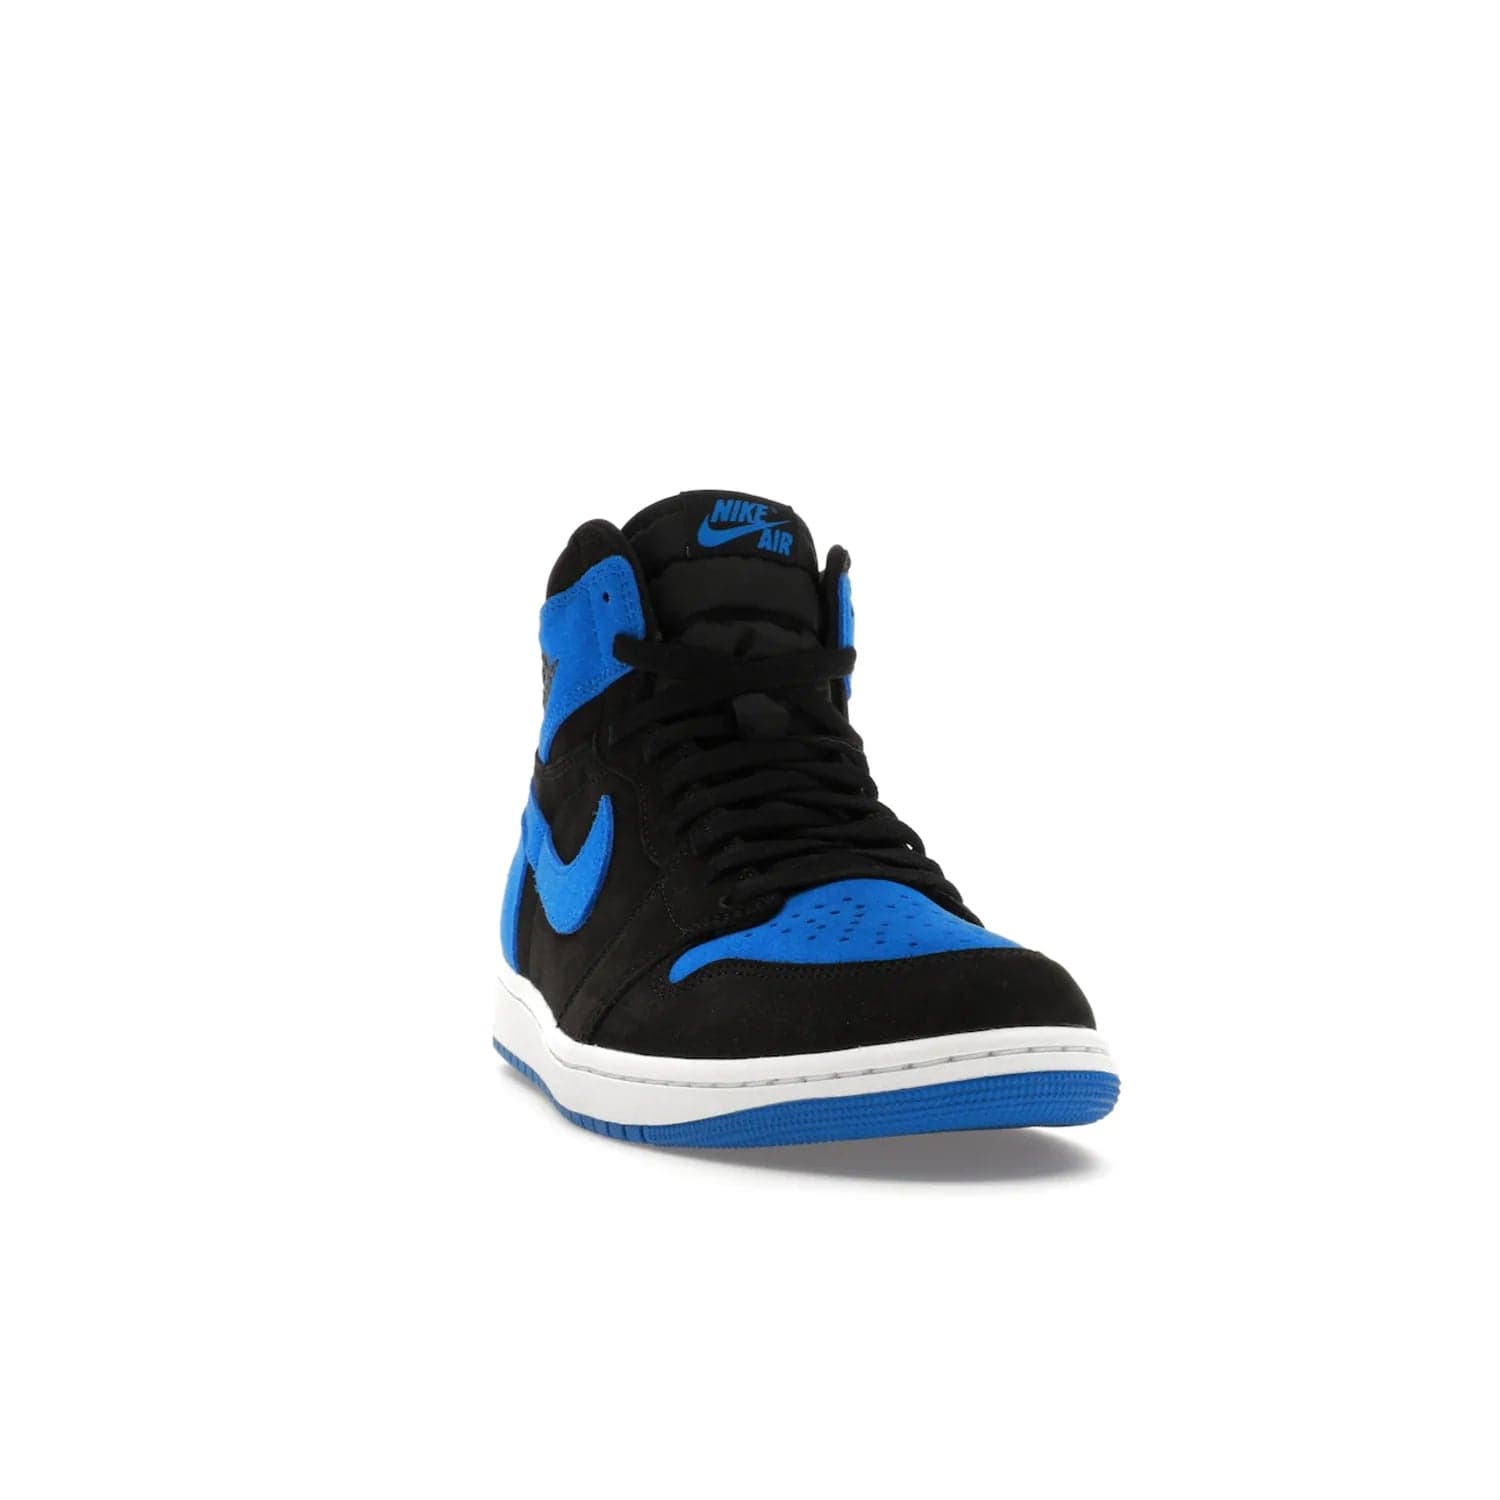 Jordan 1 Retro High OG Royal Reimagined - Image 8 - Only at www.BallersClubKickz.com - ####
Old meets the new: Jordan 1 Retro High OG 'Royal Reimagined' is a bold statement of evolution with its royal blue and black suede material makeup. Swoosh overlays, Wings logos, padded ankle collars and Nike Air tags maintain the OG's legendary lineage. Get a pair on November 4th and be part of a fearless, unyielding story.